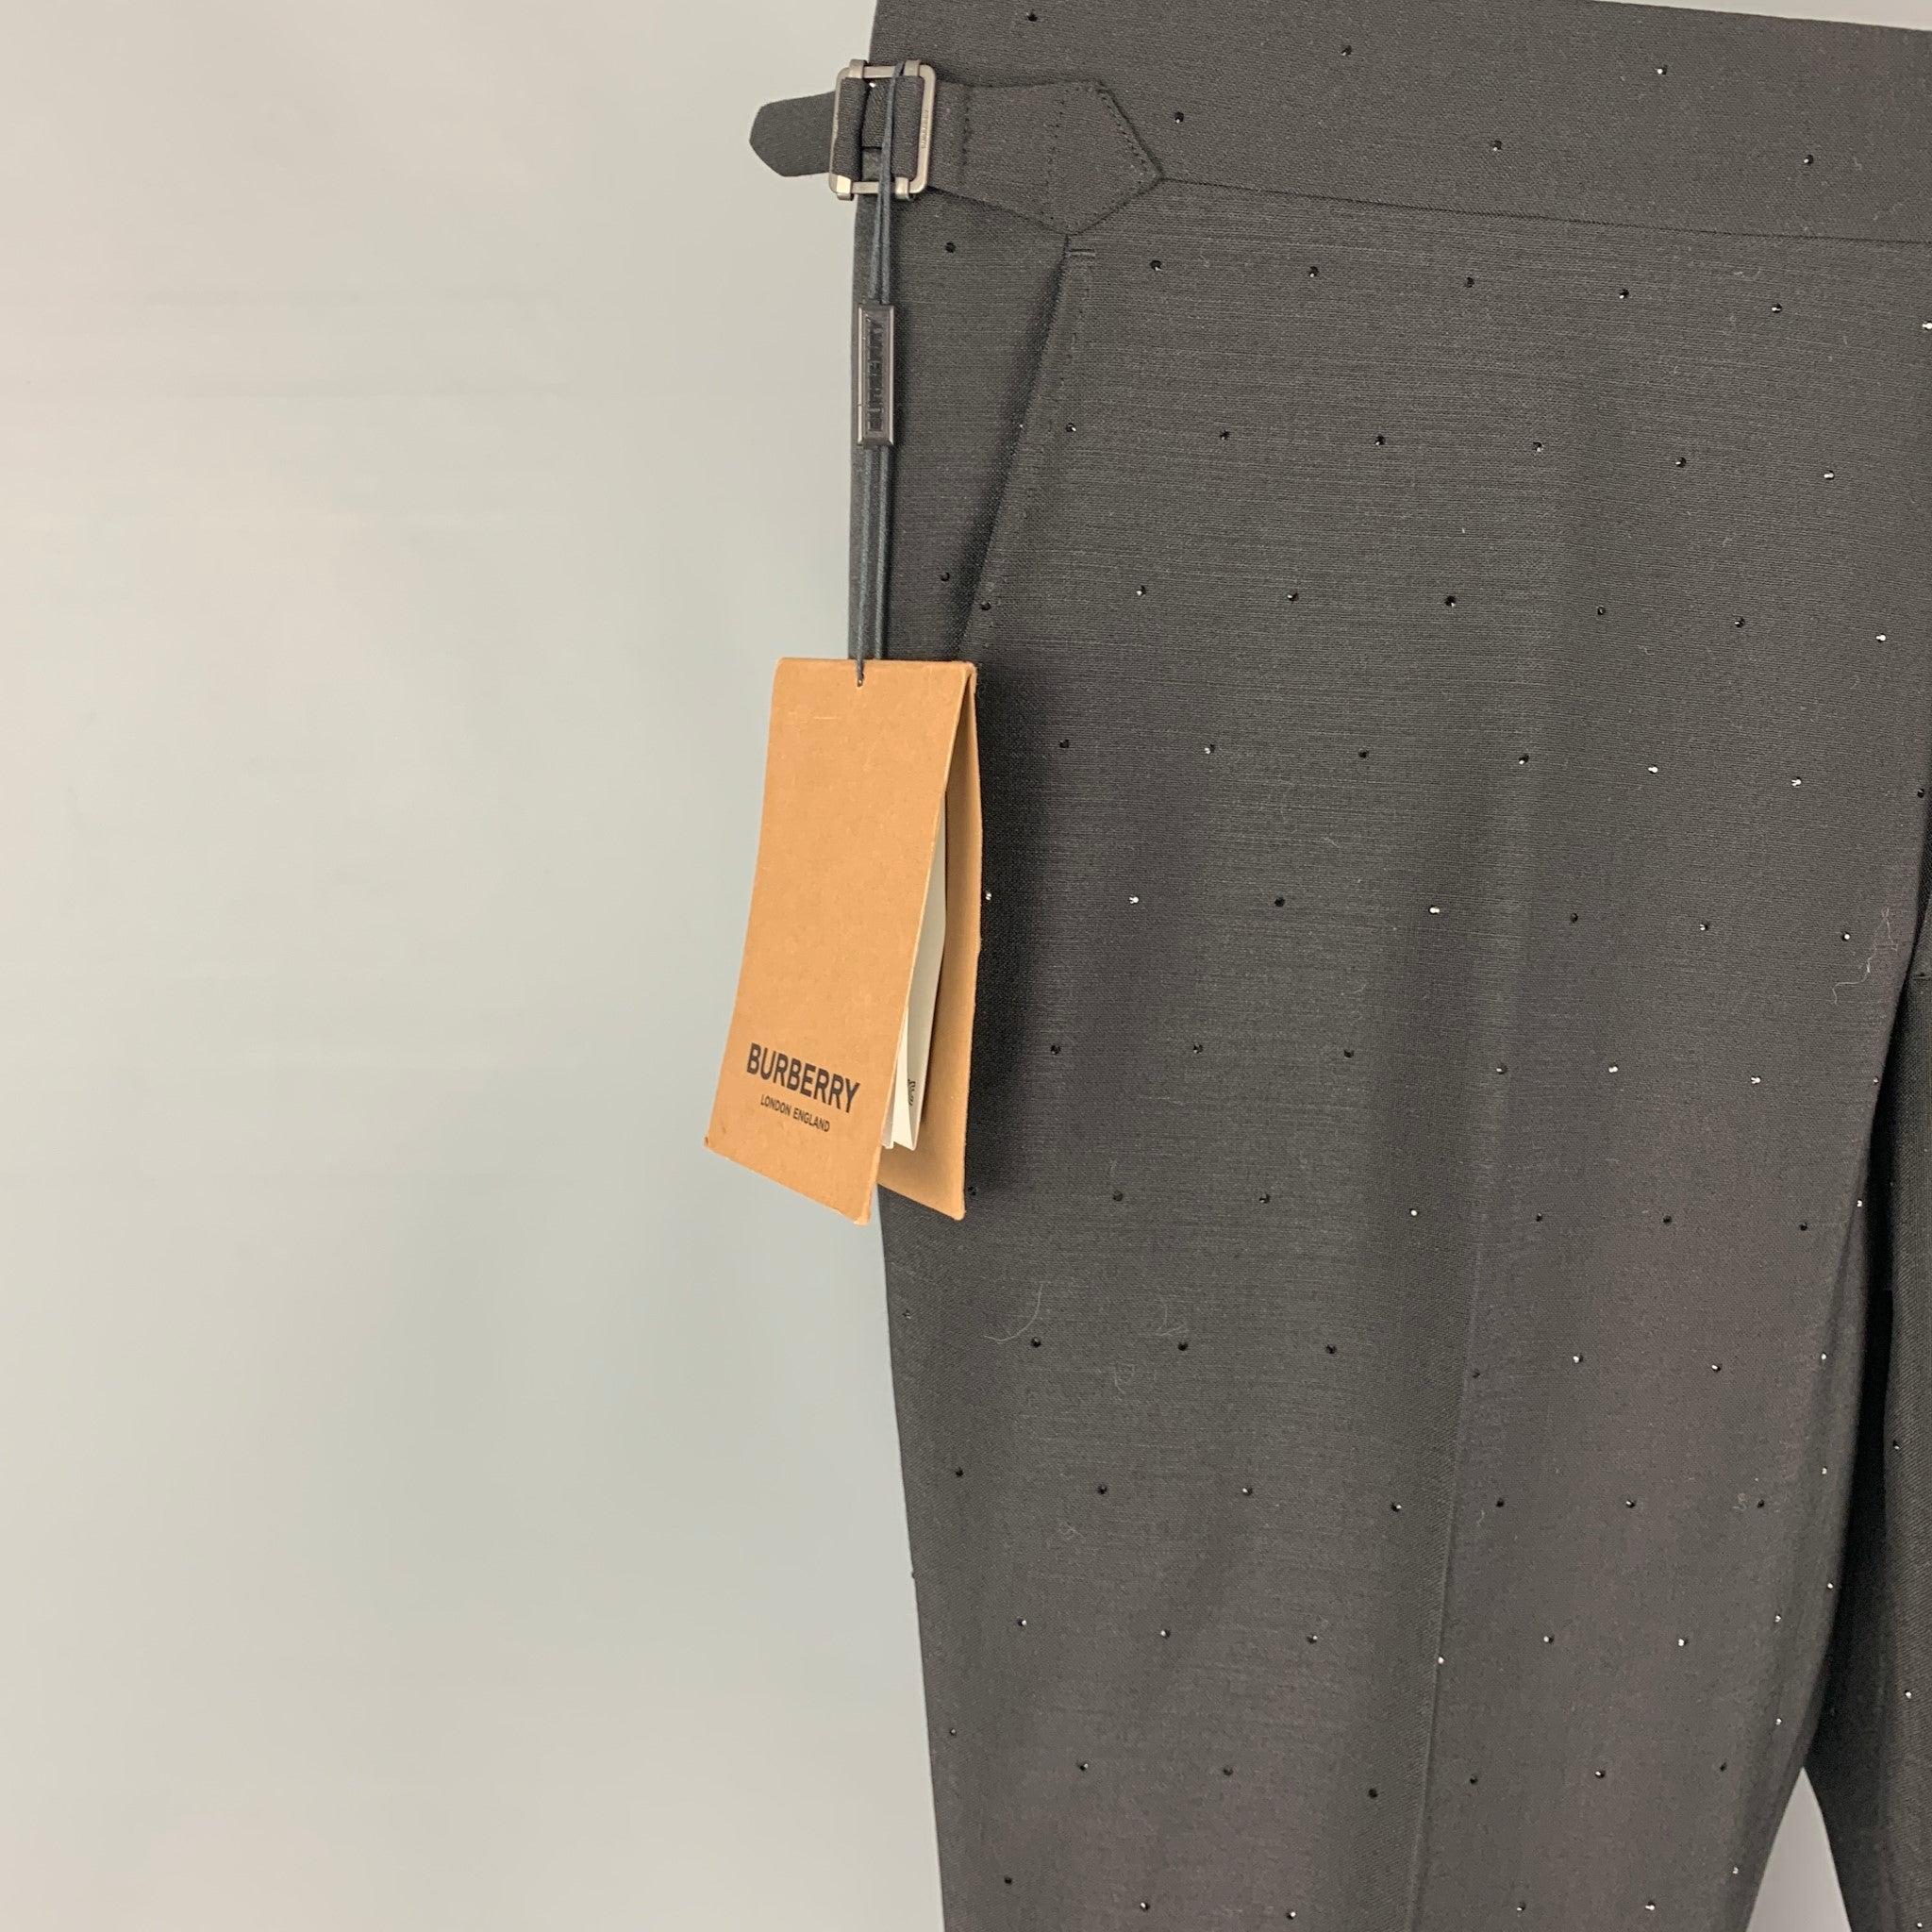 BUBERRY dress pants comes in a black mohair / wool with embellished details featuring a flat front, adjustable side tabs, and a zi fly closure. Made in Italy.New with tags.
 

Marked:  52 R 

Measurements: 
 Waist: 36 inches Rise:
11 inches Inseam: